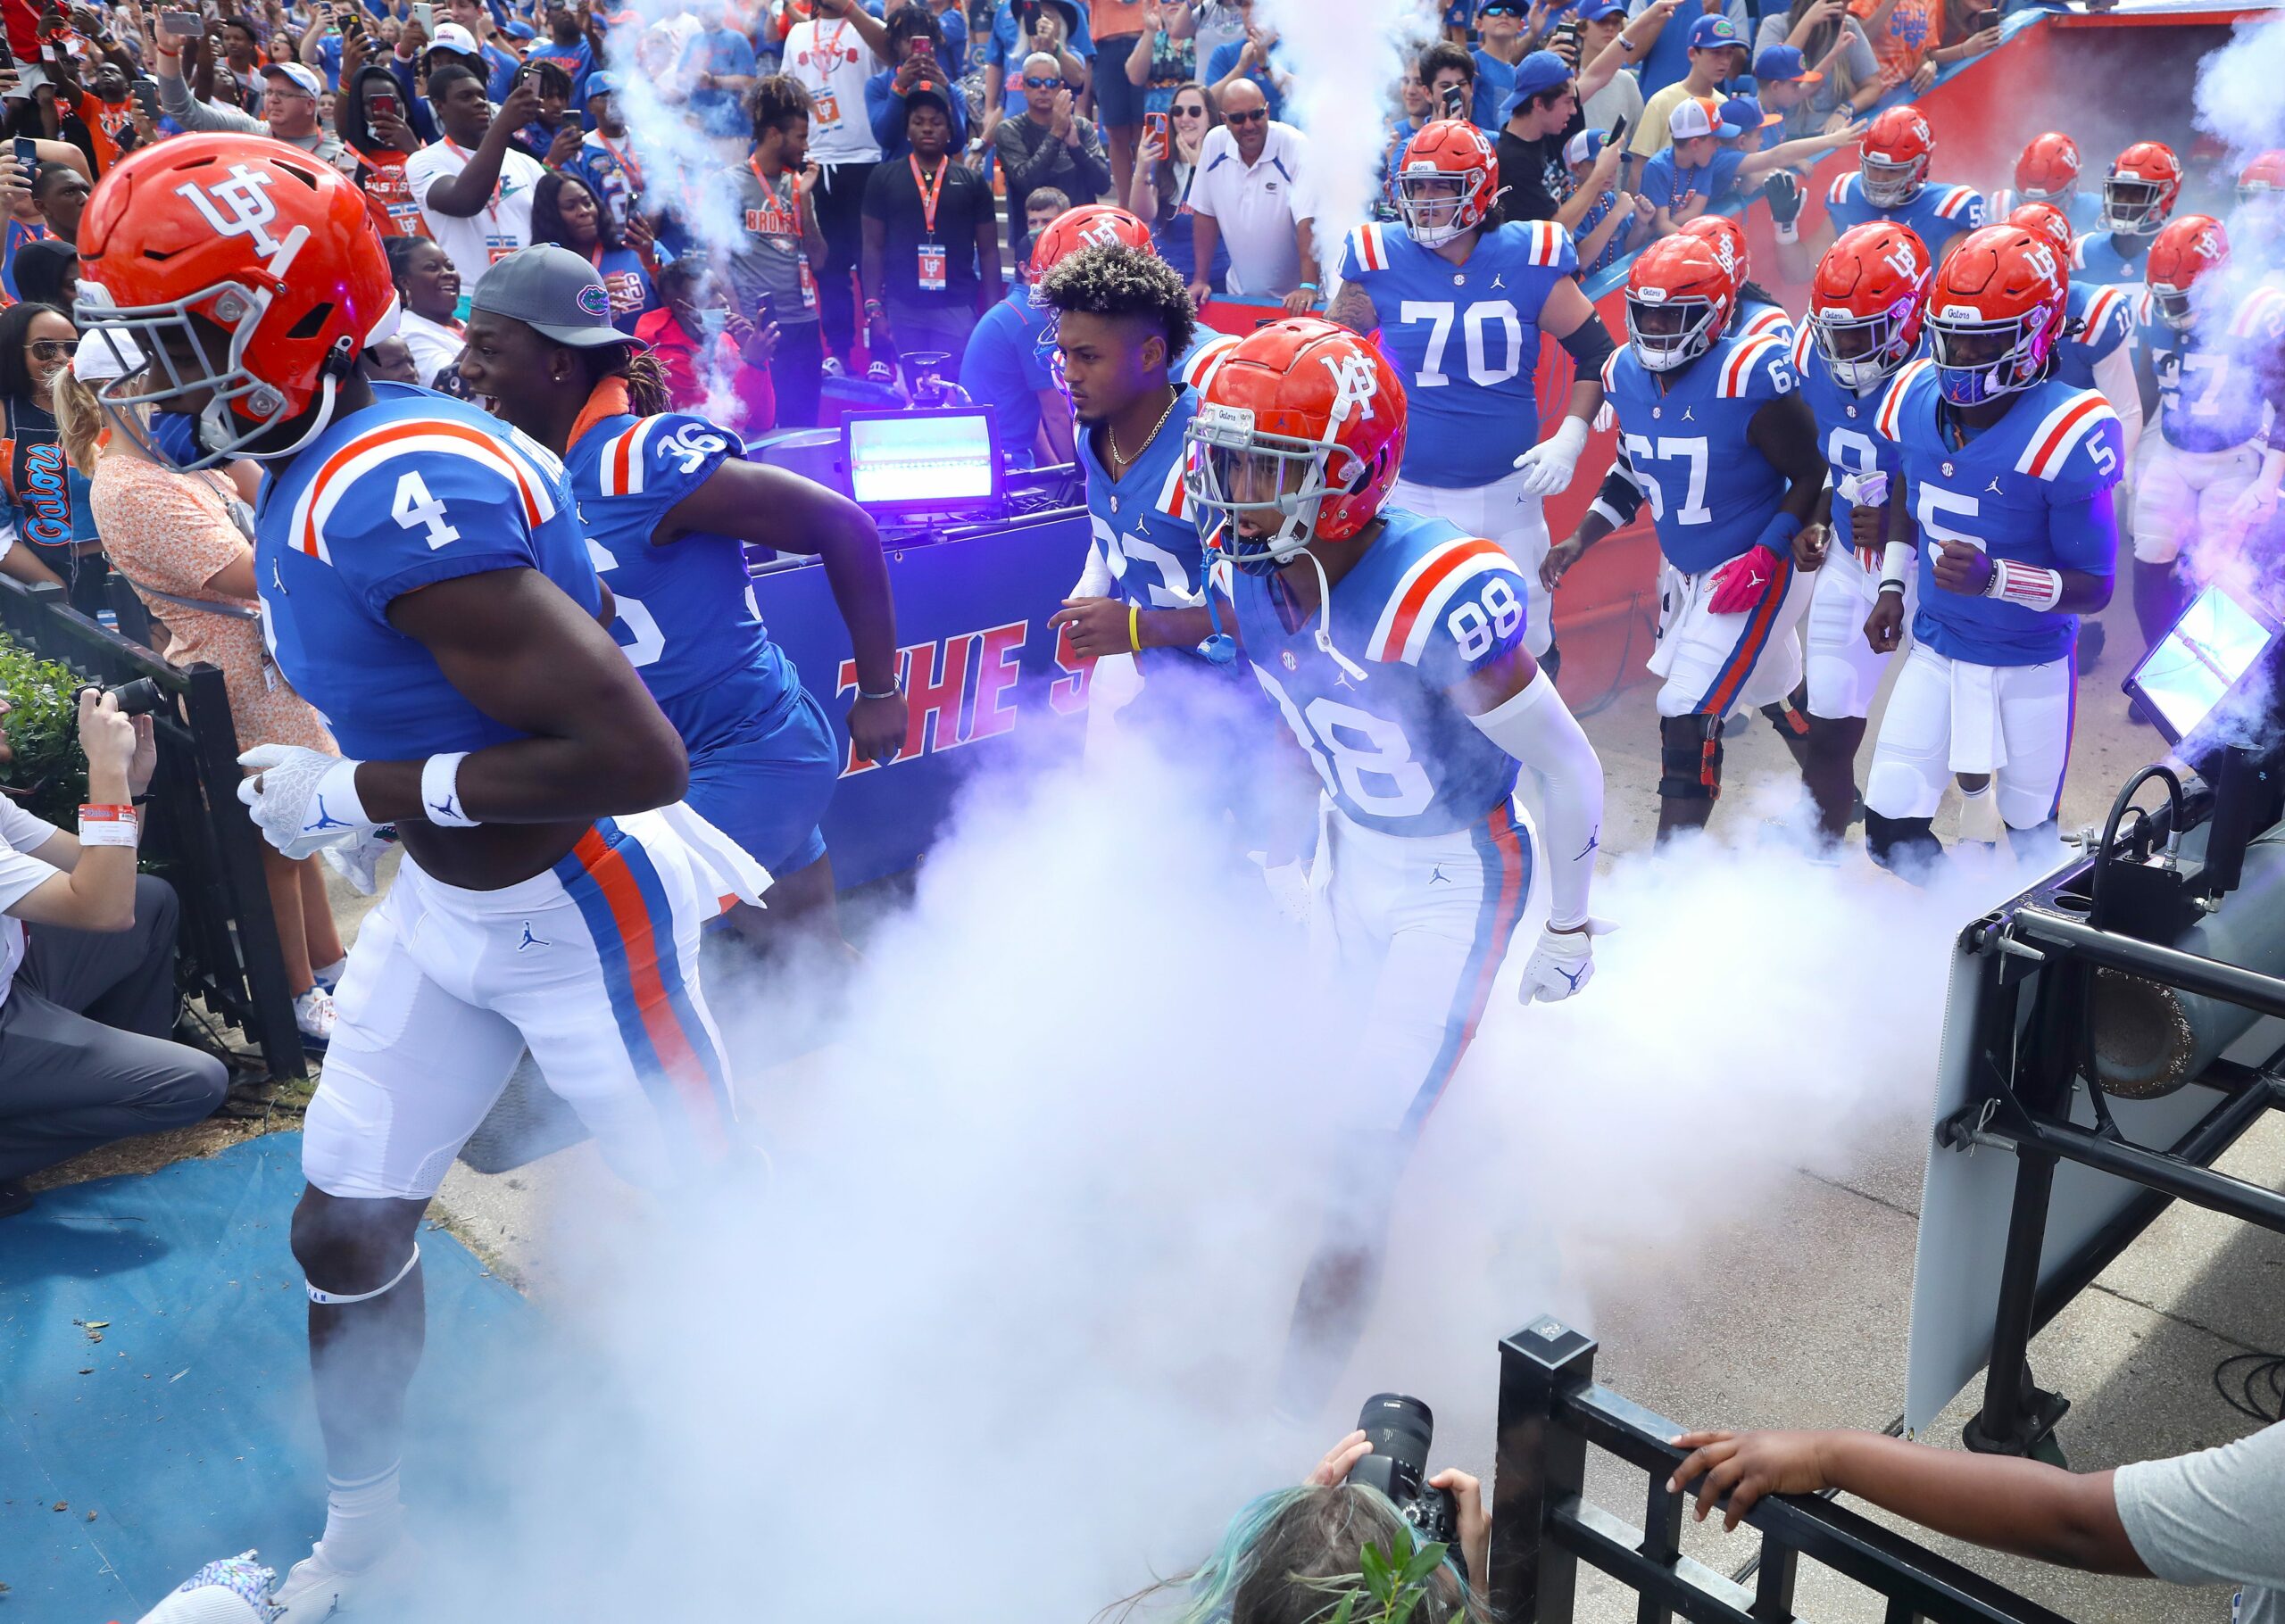 Florida Football Depth Chart: Updates ahead of Week 4 matchup with Tennessee